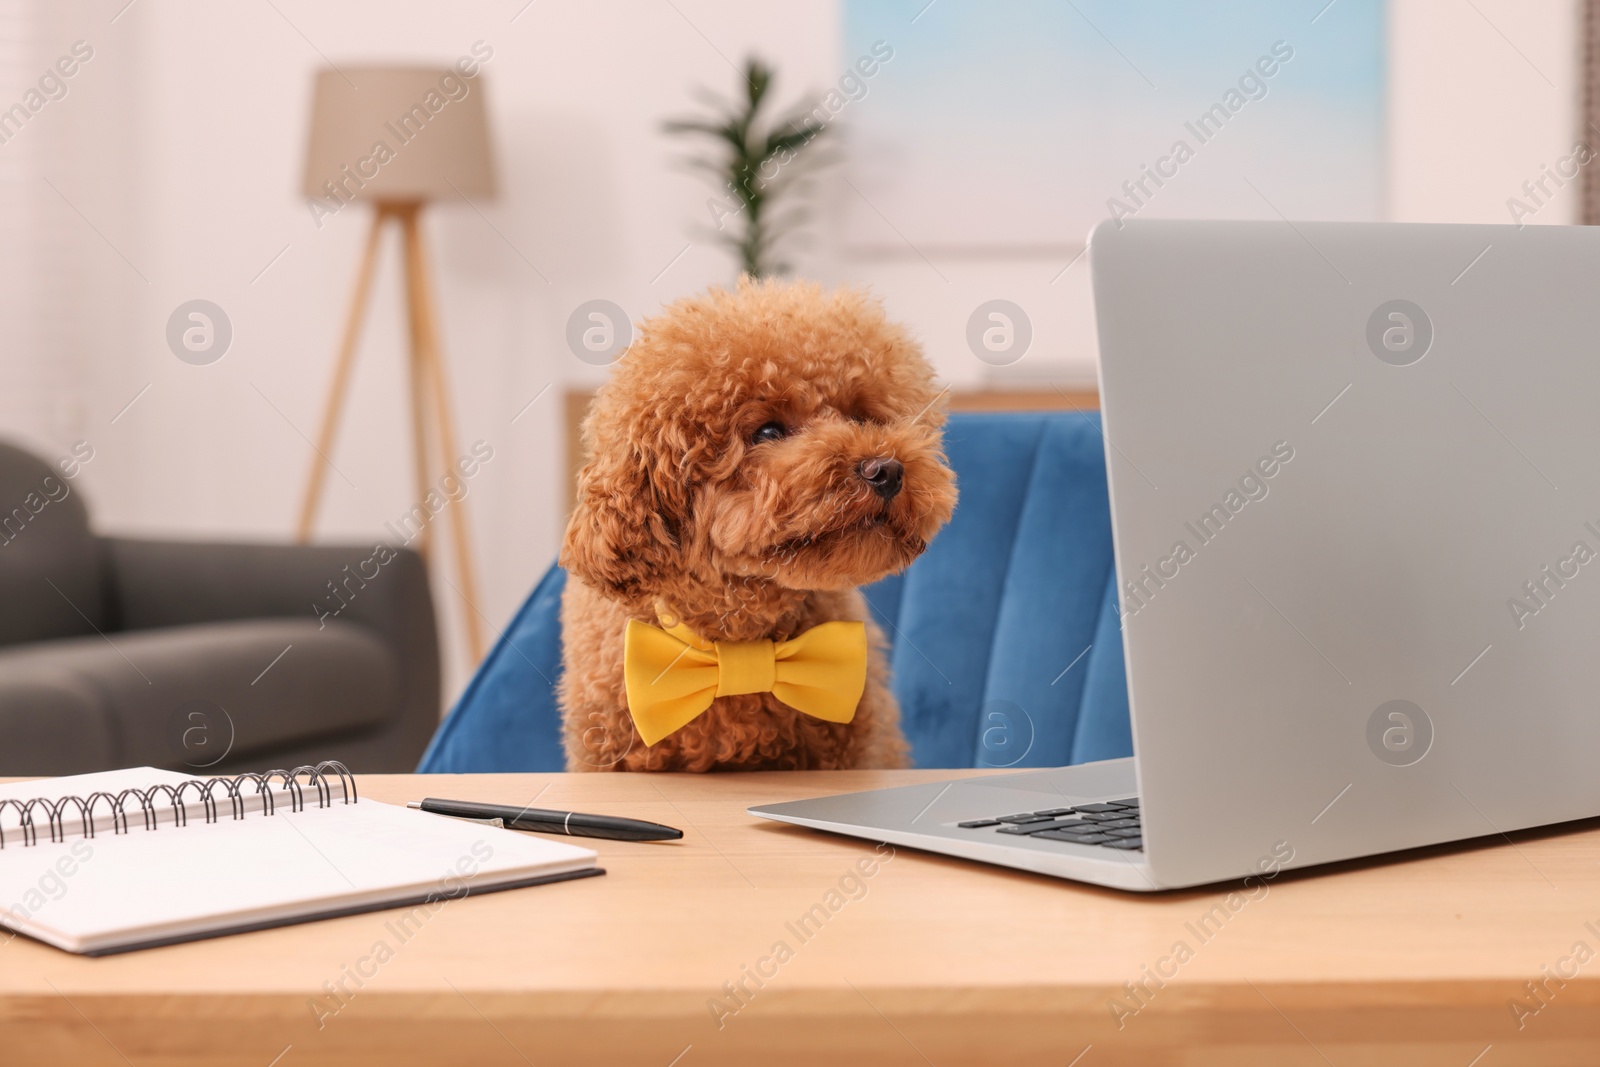 Photo of Cute Maltipoo dog wearing yellow bow tie at desk with laptop and notebook in room. Lovely pet